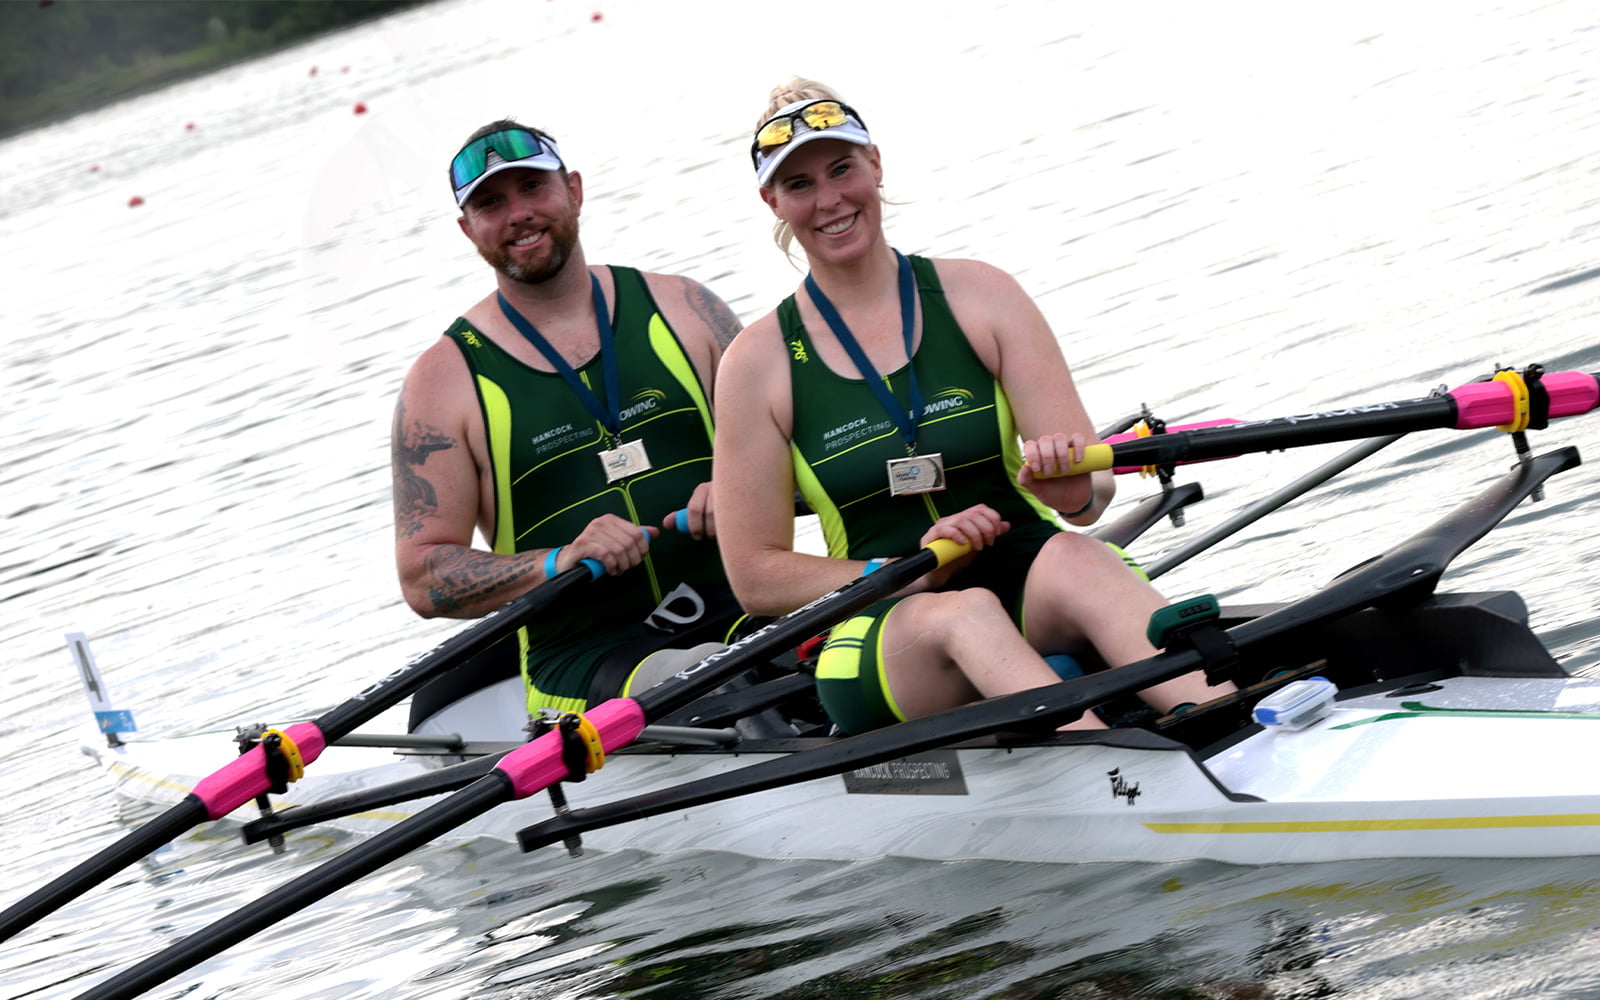 Australia Qualifies A Third Boat For The Tokyo Paralympic Games